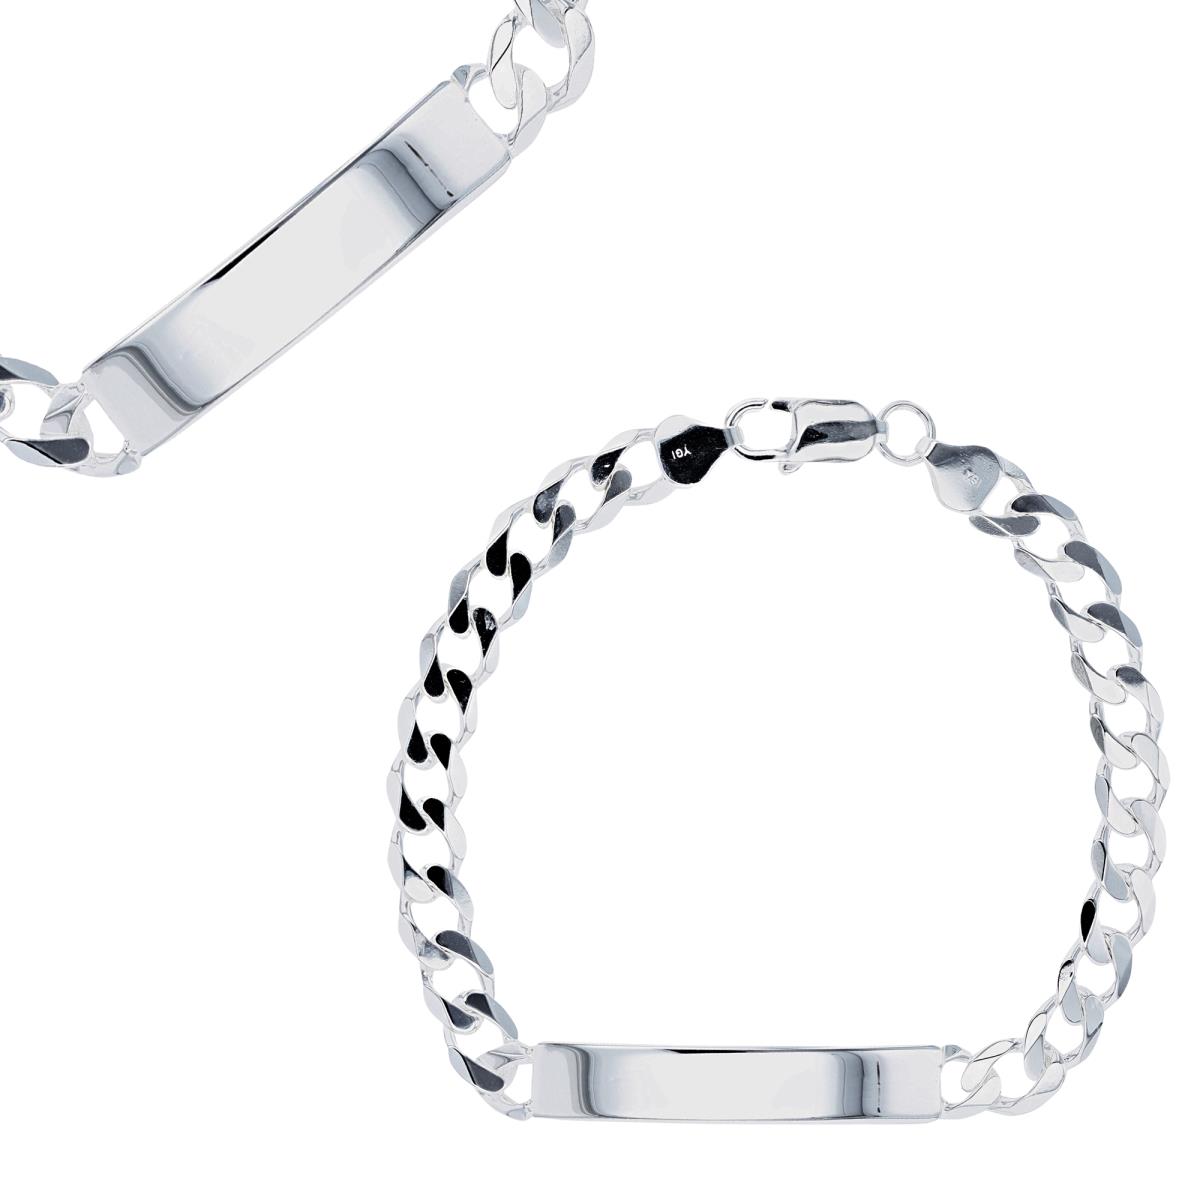 Sterling Silver Silver Plated Anti-Tarnish 8mm ID 8.5" Link Chain Bracelet